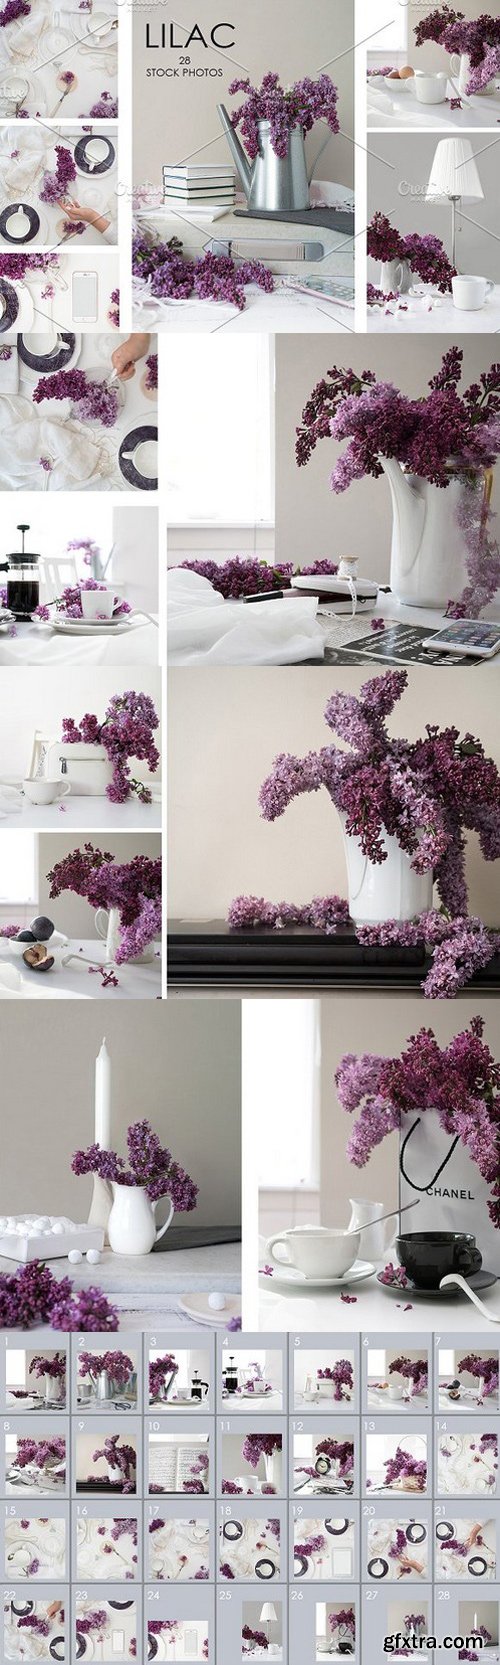 CM - FLOWERS OF LILAC. 28 STOCK PHOTOS. 1636373